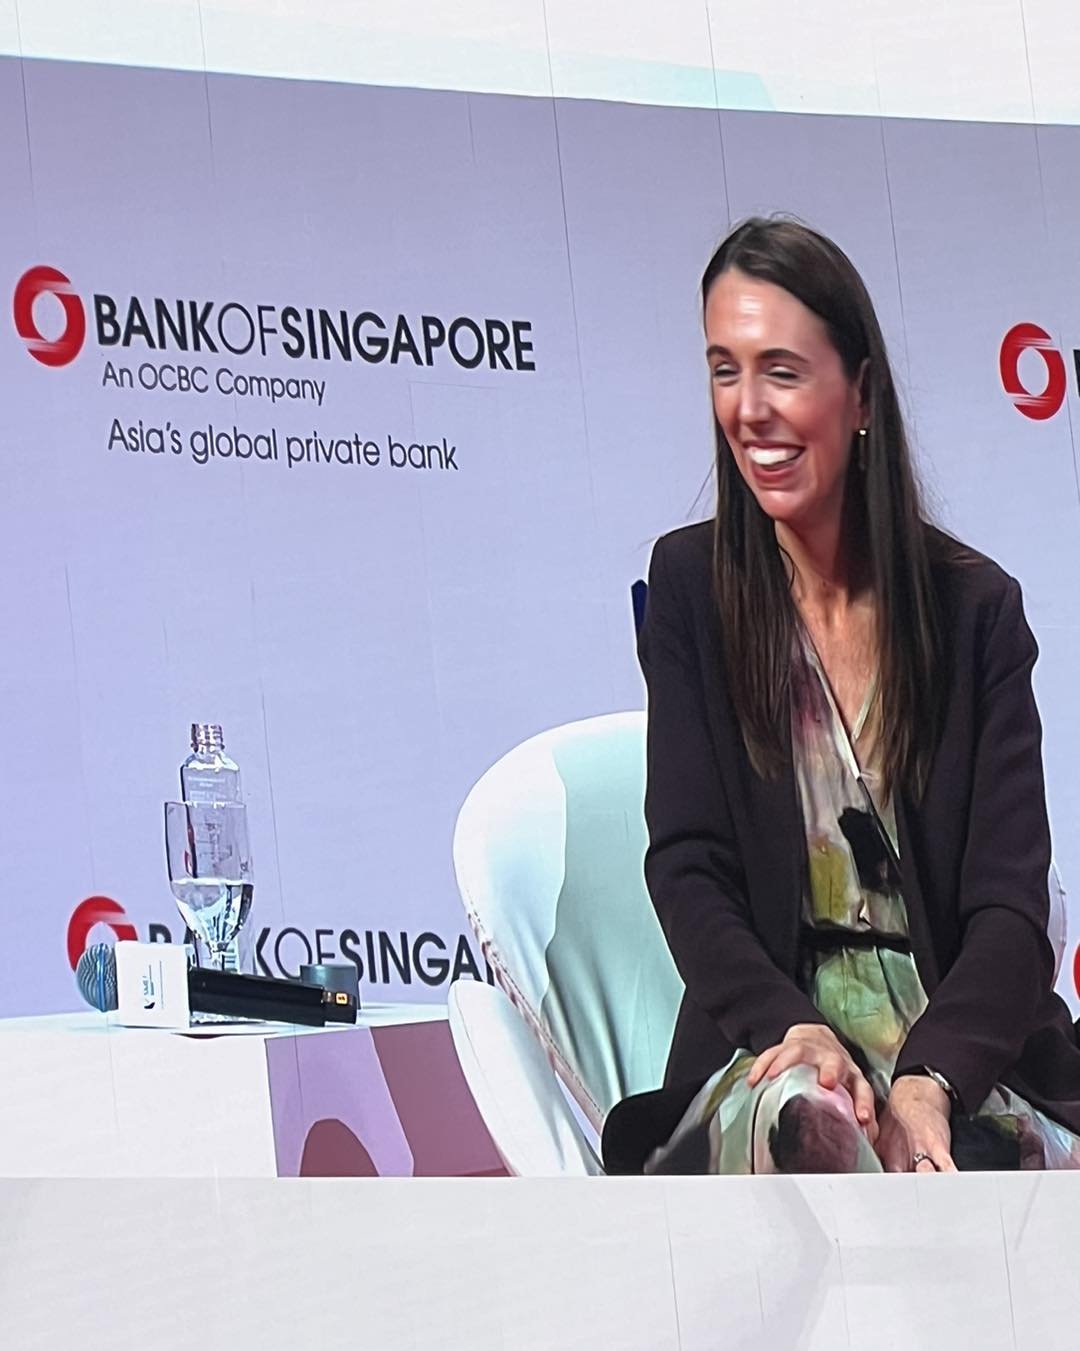 BF Talk organised by Bank of Singapore and SMU, featuring former NZ PM Dame Jacinda Arden - 1.jpeg